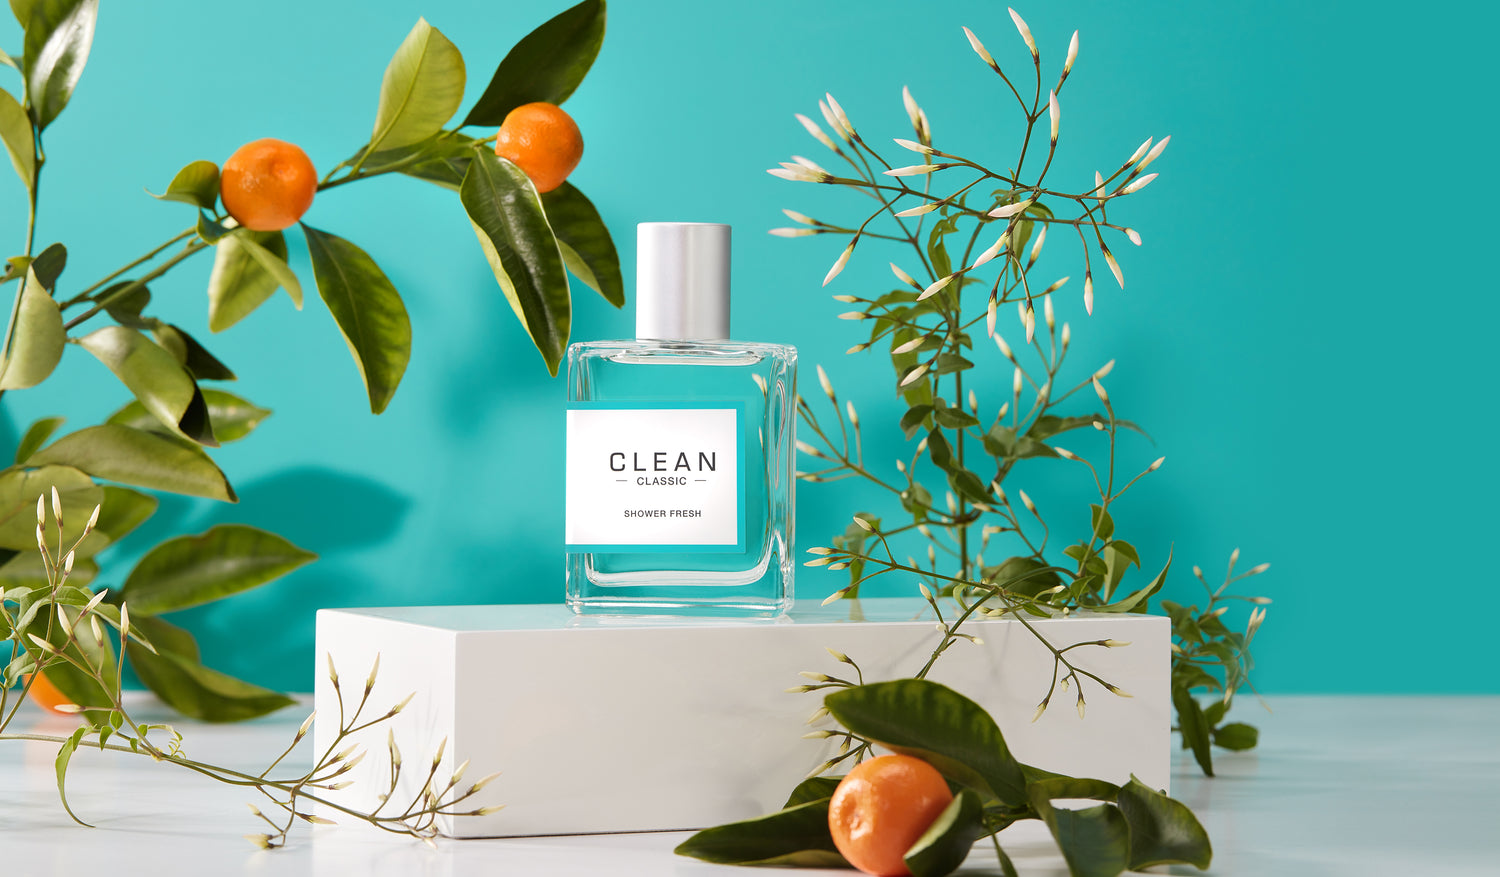 CLEAN CLASSIC Shower Fresh: The Scent of a Perfect Spring Shower